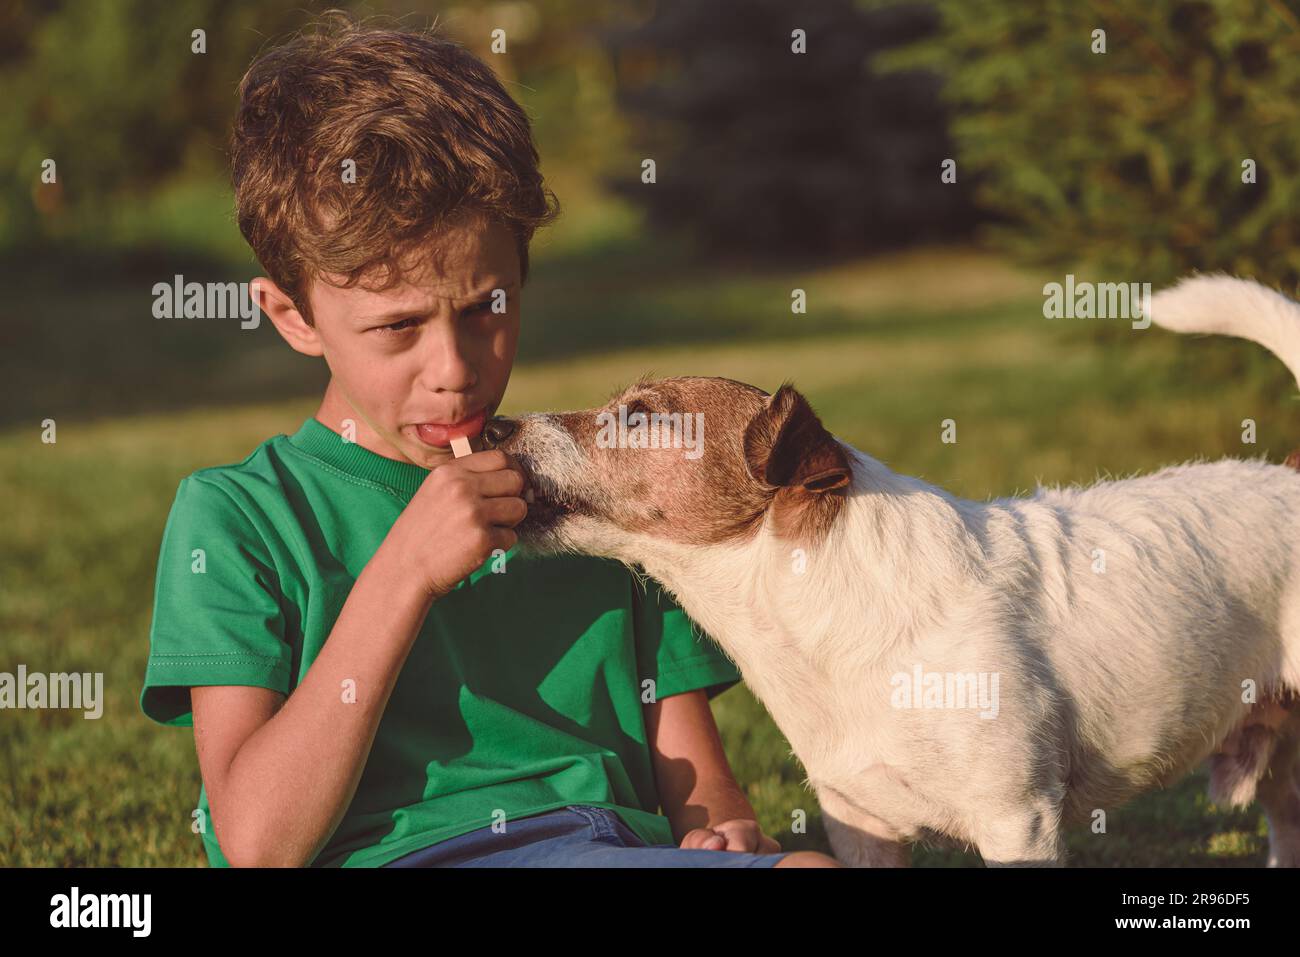 https://c8.alamy.com/comp/2R96DF5/on-summer-day-kid-is-eating-homemade-fruit-popsicle-on-stick-and-dog-begging-to-share-a-bite-2R96DF5.jpg